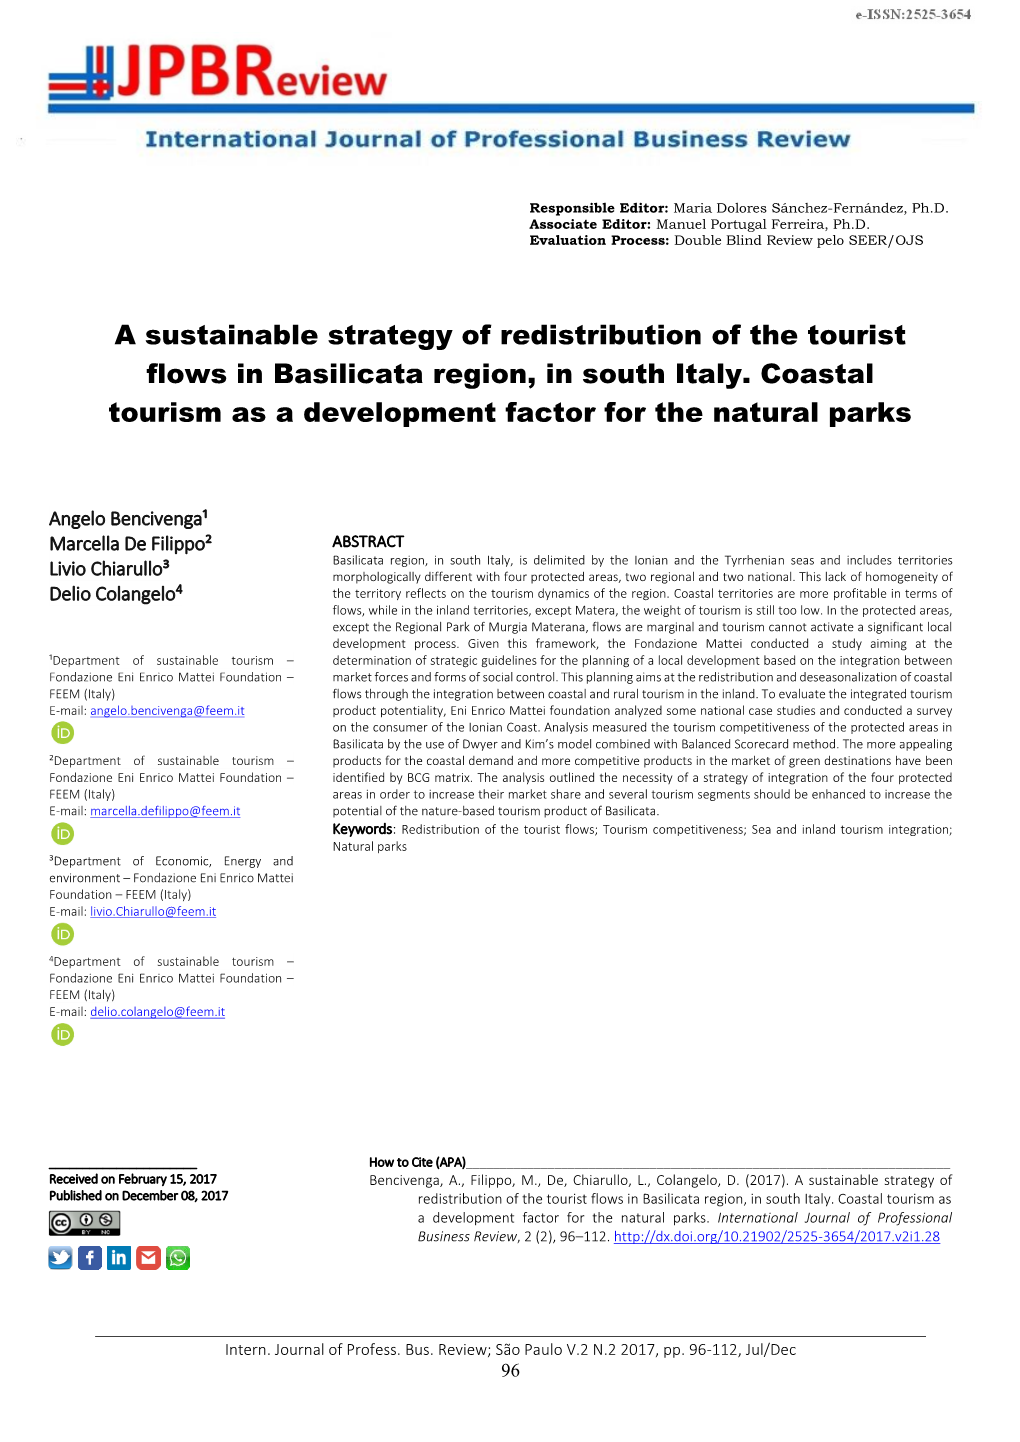 A Sustainable Strategy of Redistribution of the Tourist Flows in Basilicata Region, in South Italy